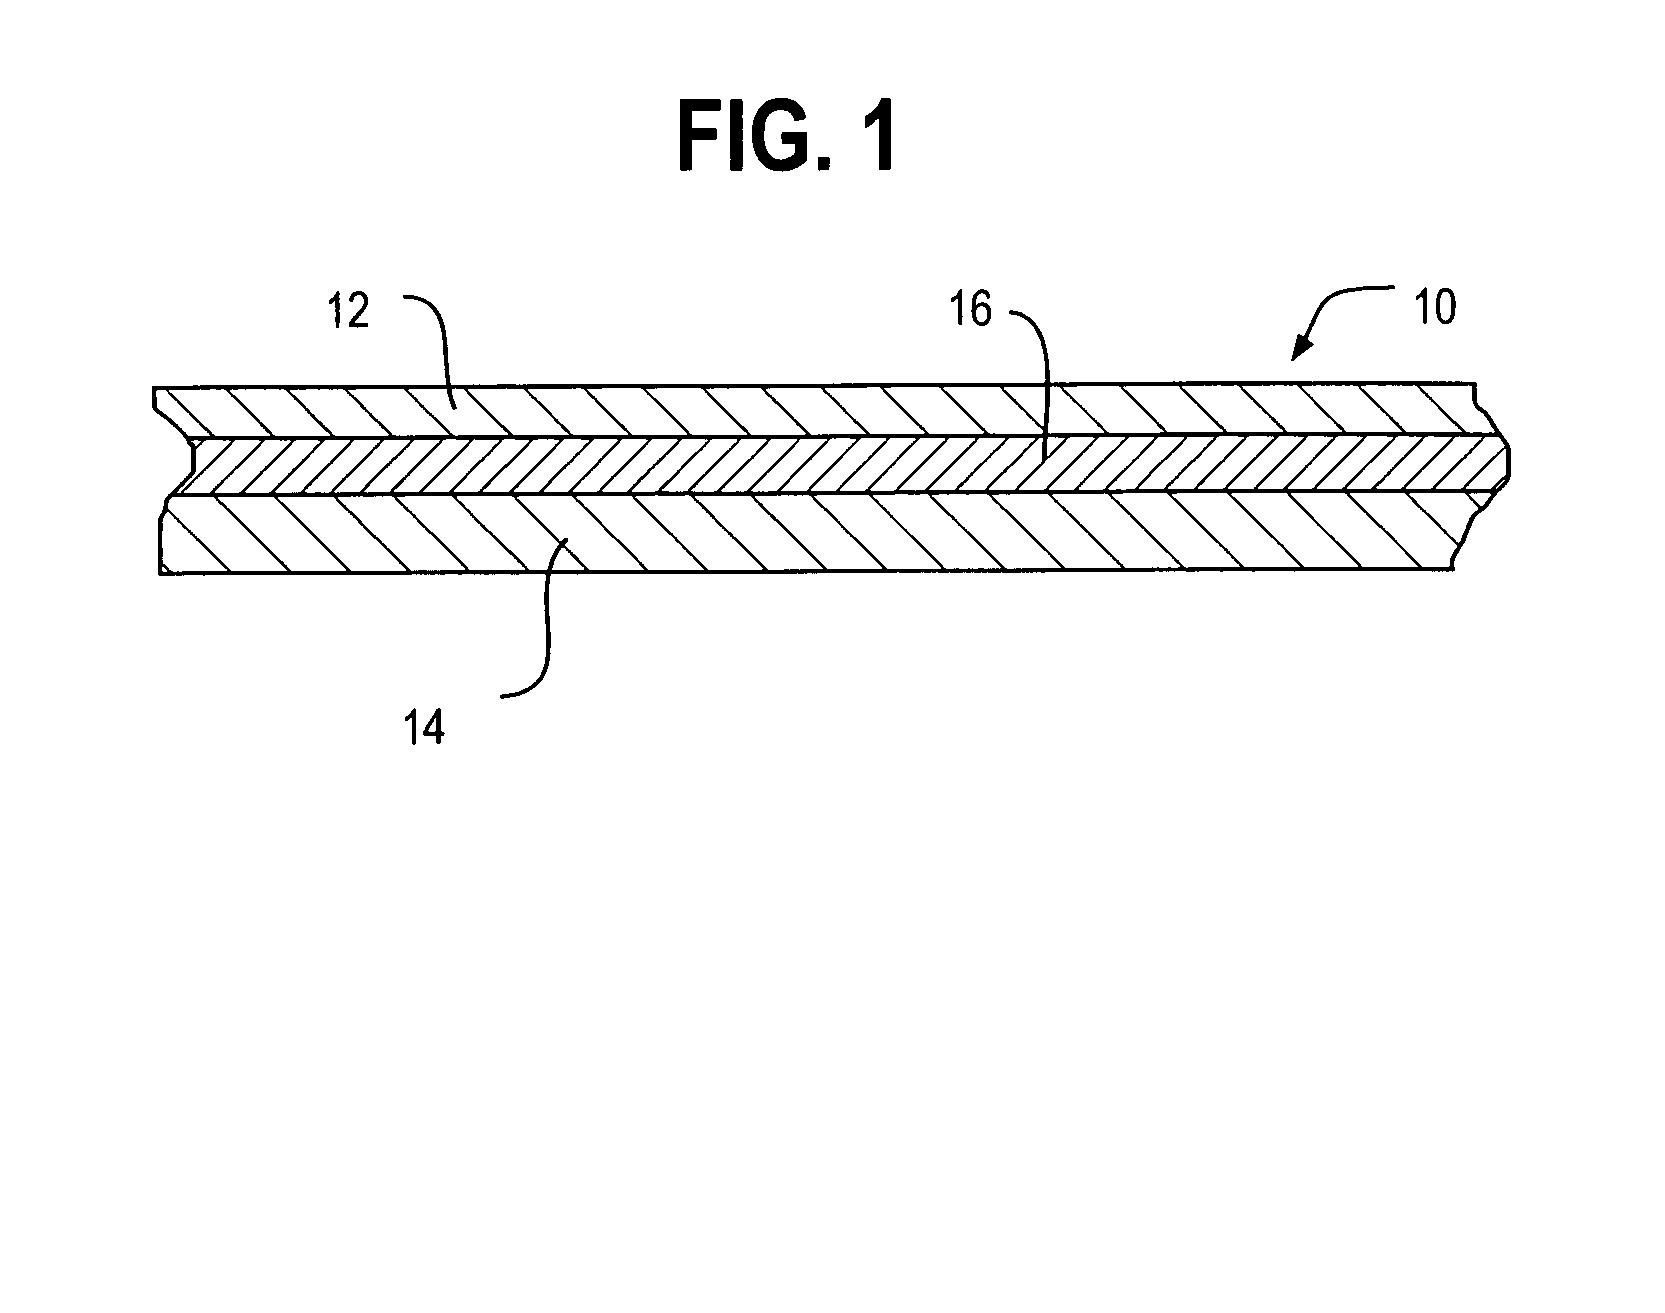 Ultraviolet (UV) post cure heat transfer label, method of making and using same